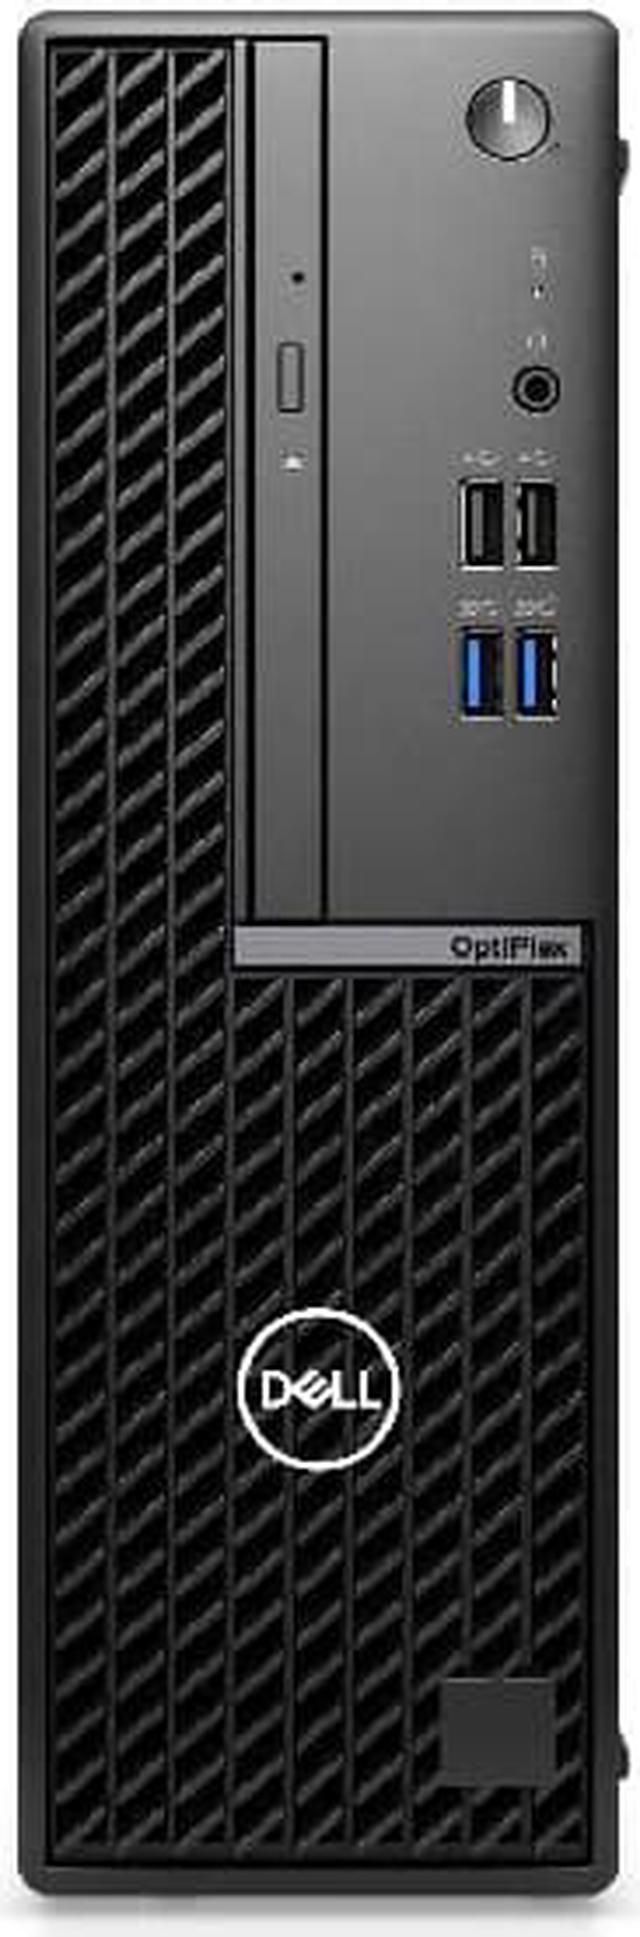 Dell Optiplex 7010 SFF, Intel Core i5-13500(6+8Cores/24MB/20T/2.5GHz to 4.8GHz),8GB(1x8) DDR4,512GB(M.2)NVMe SSD,Intel Integrated Graphics,noWiFi,Dell Optical Mouse - MS116,Dell Wired Keyboard KB216,180W,Win11Pro,3Yr ProSupport_4